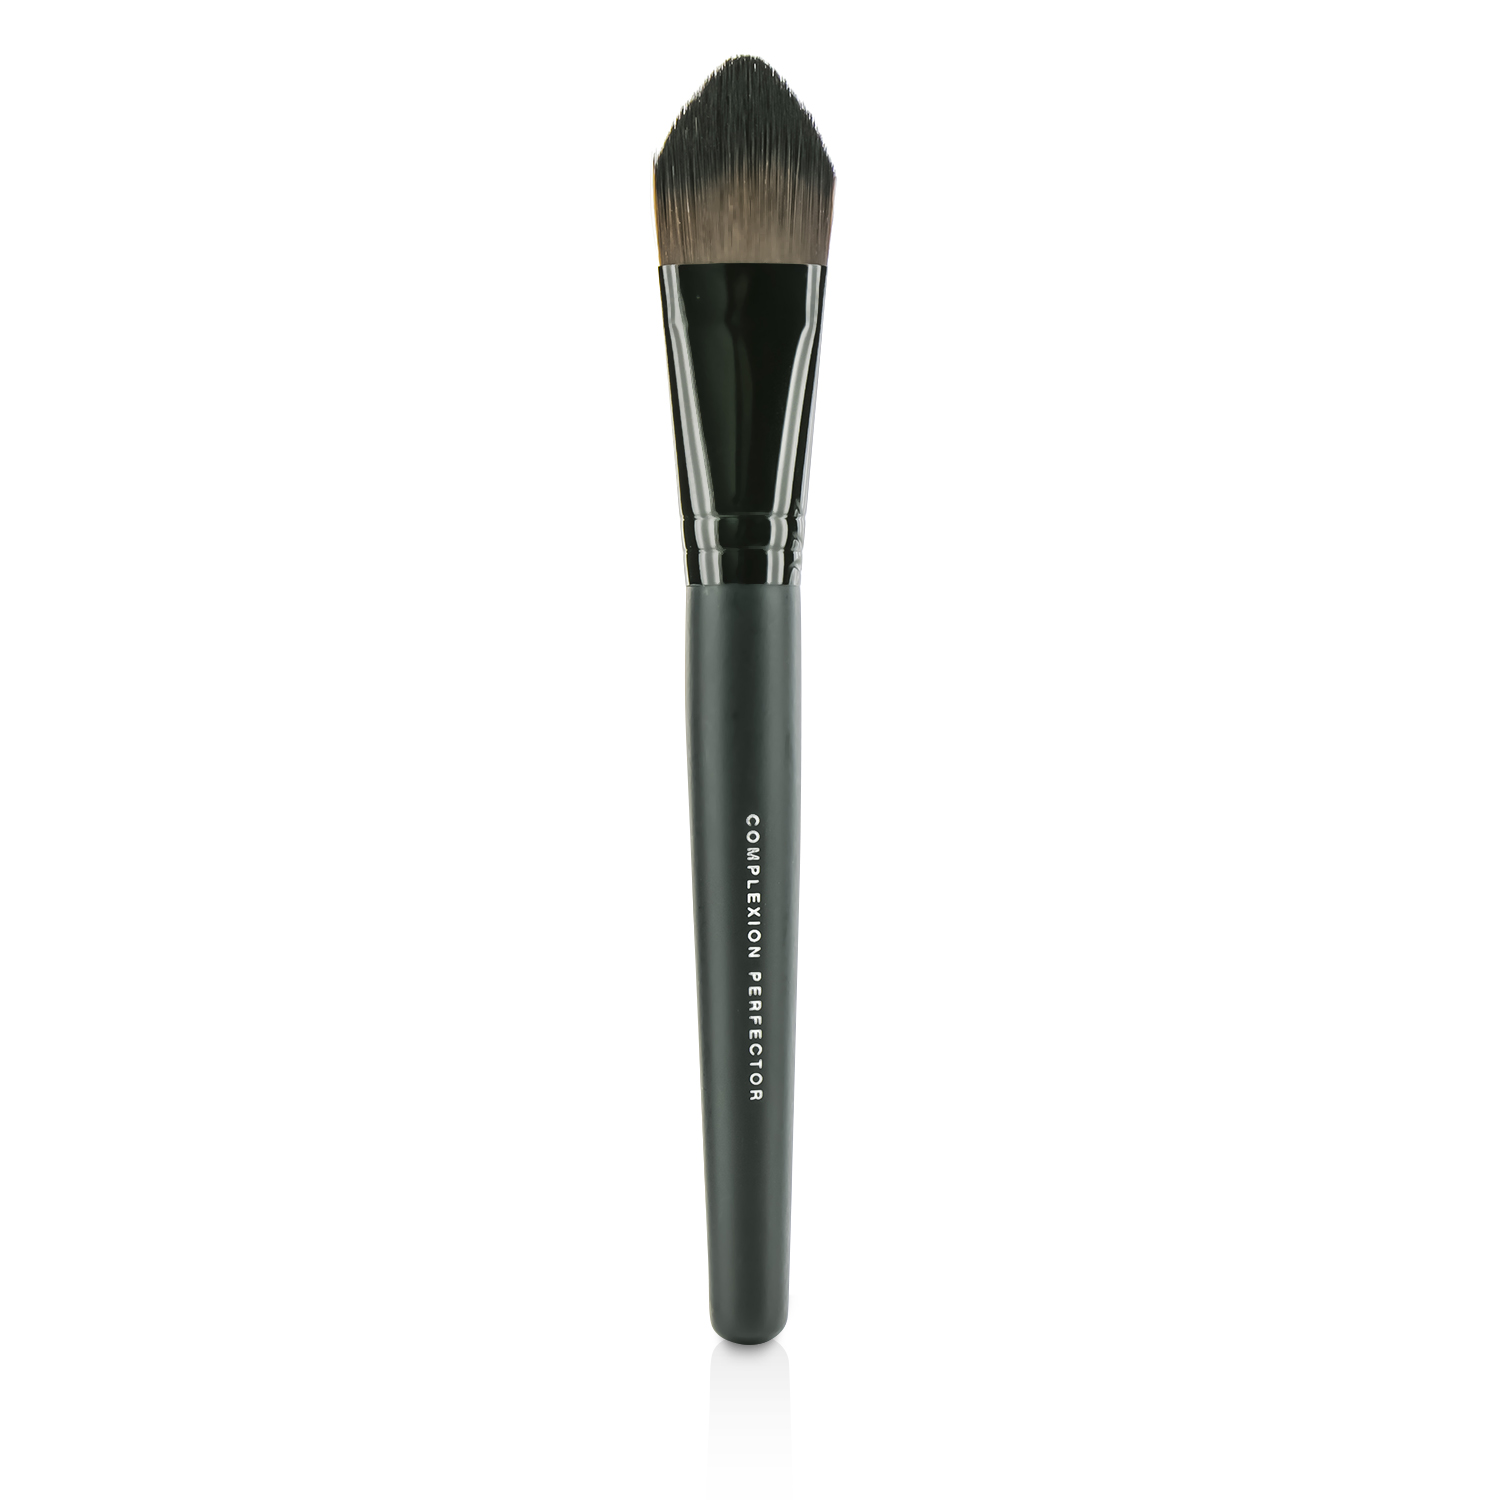 Complexion Perfector Brush BareMinerals Image